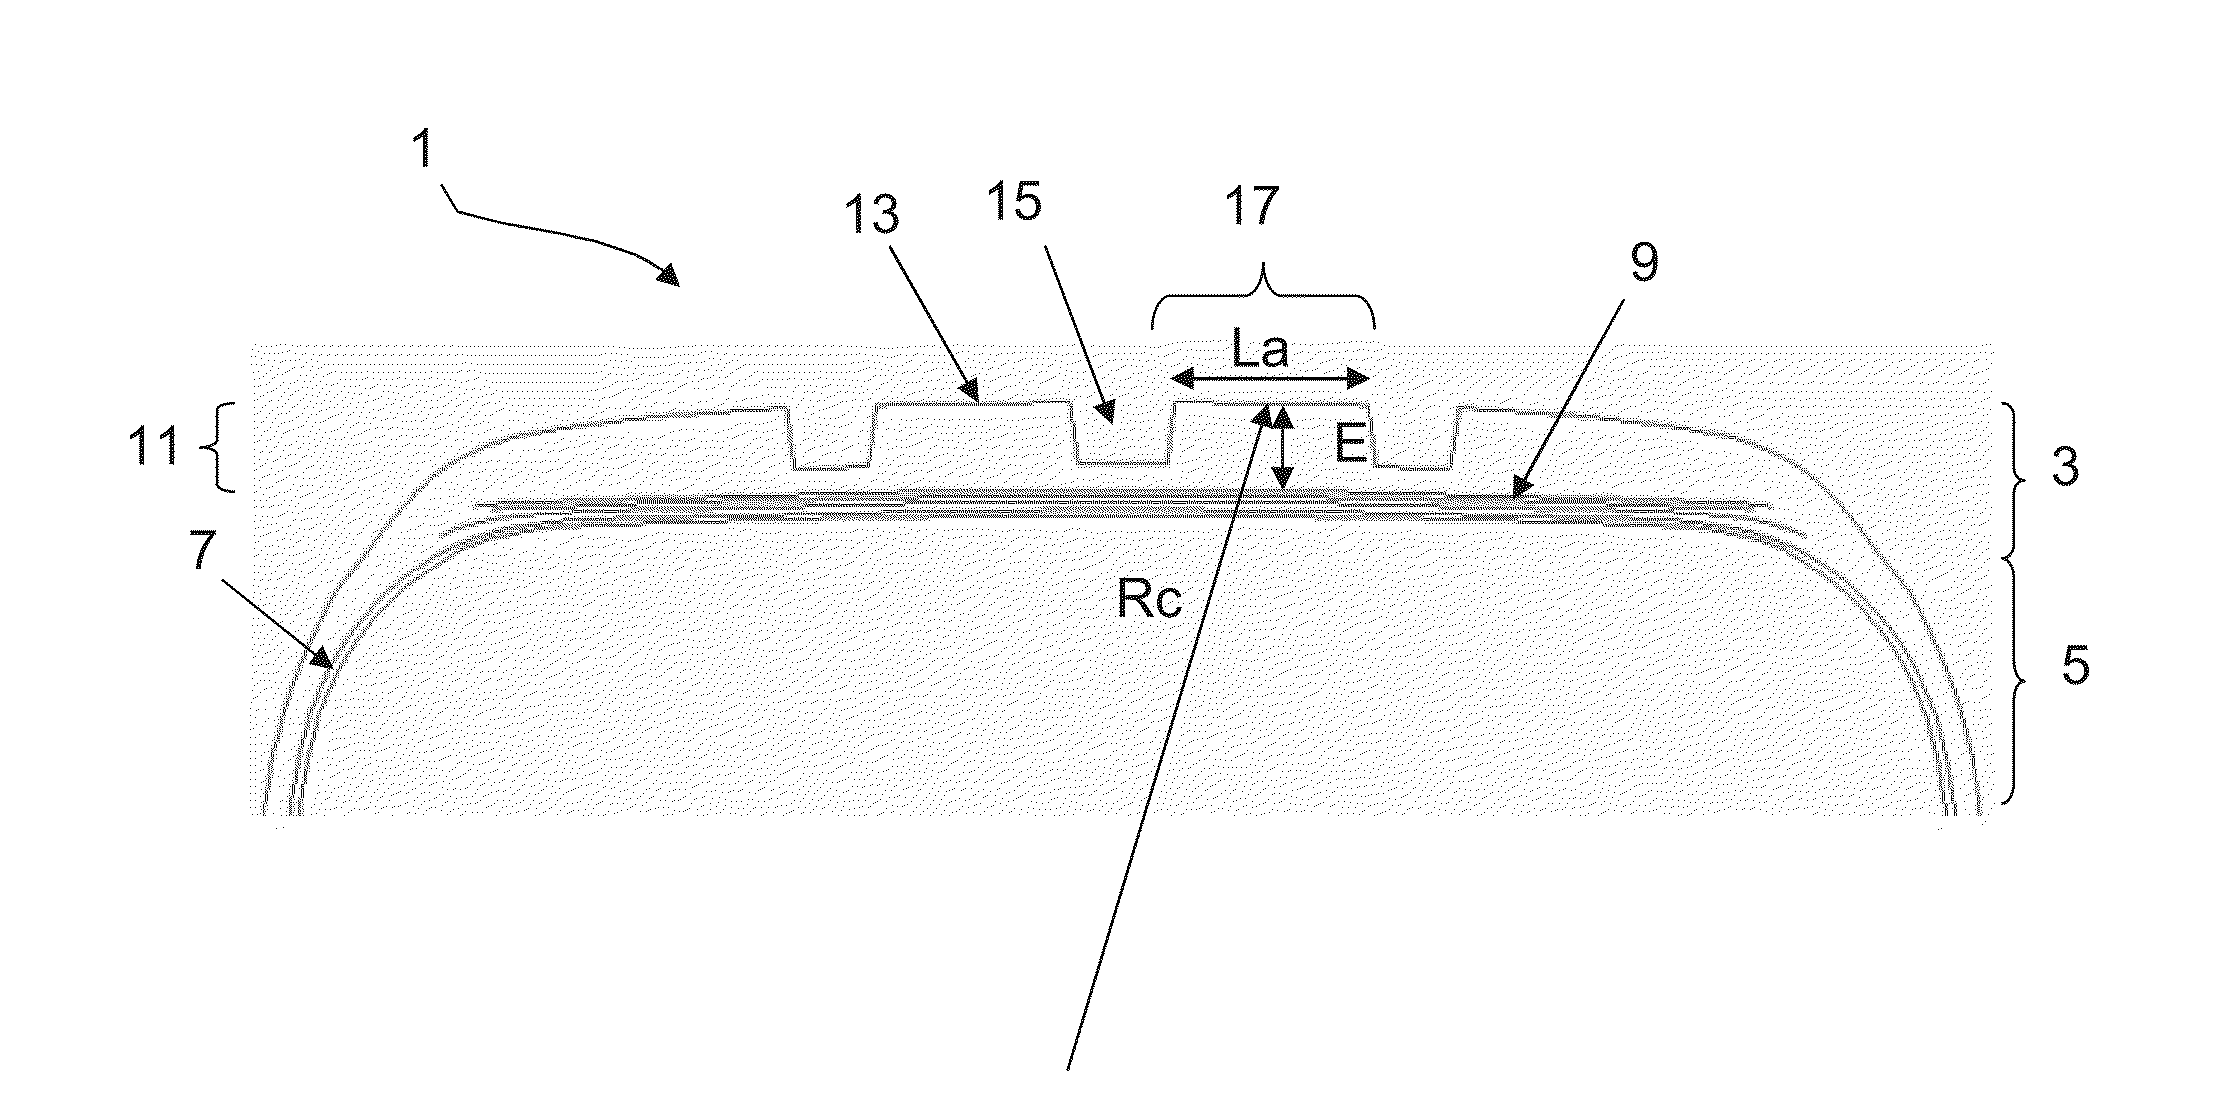 Pneumatic tire tread comprising a plurality of incisions